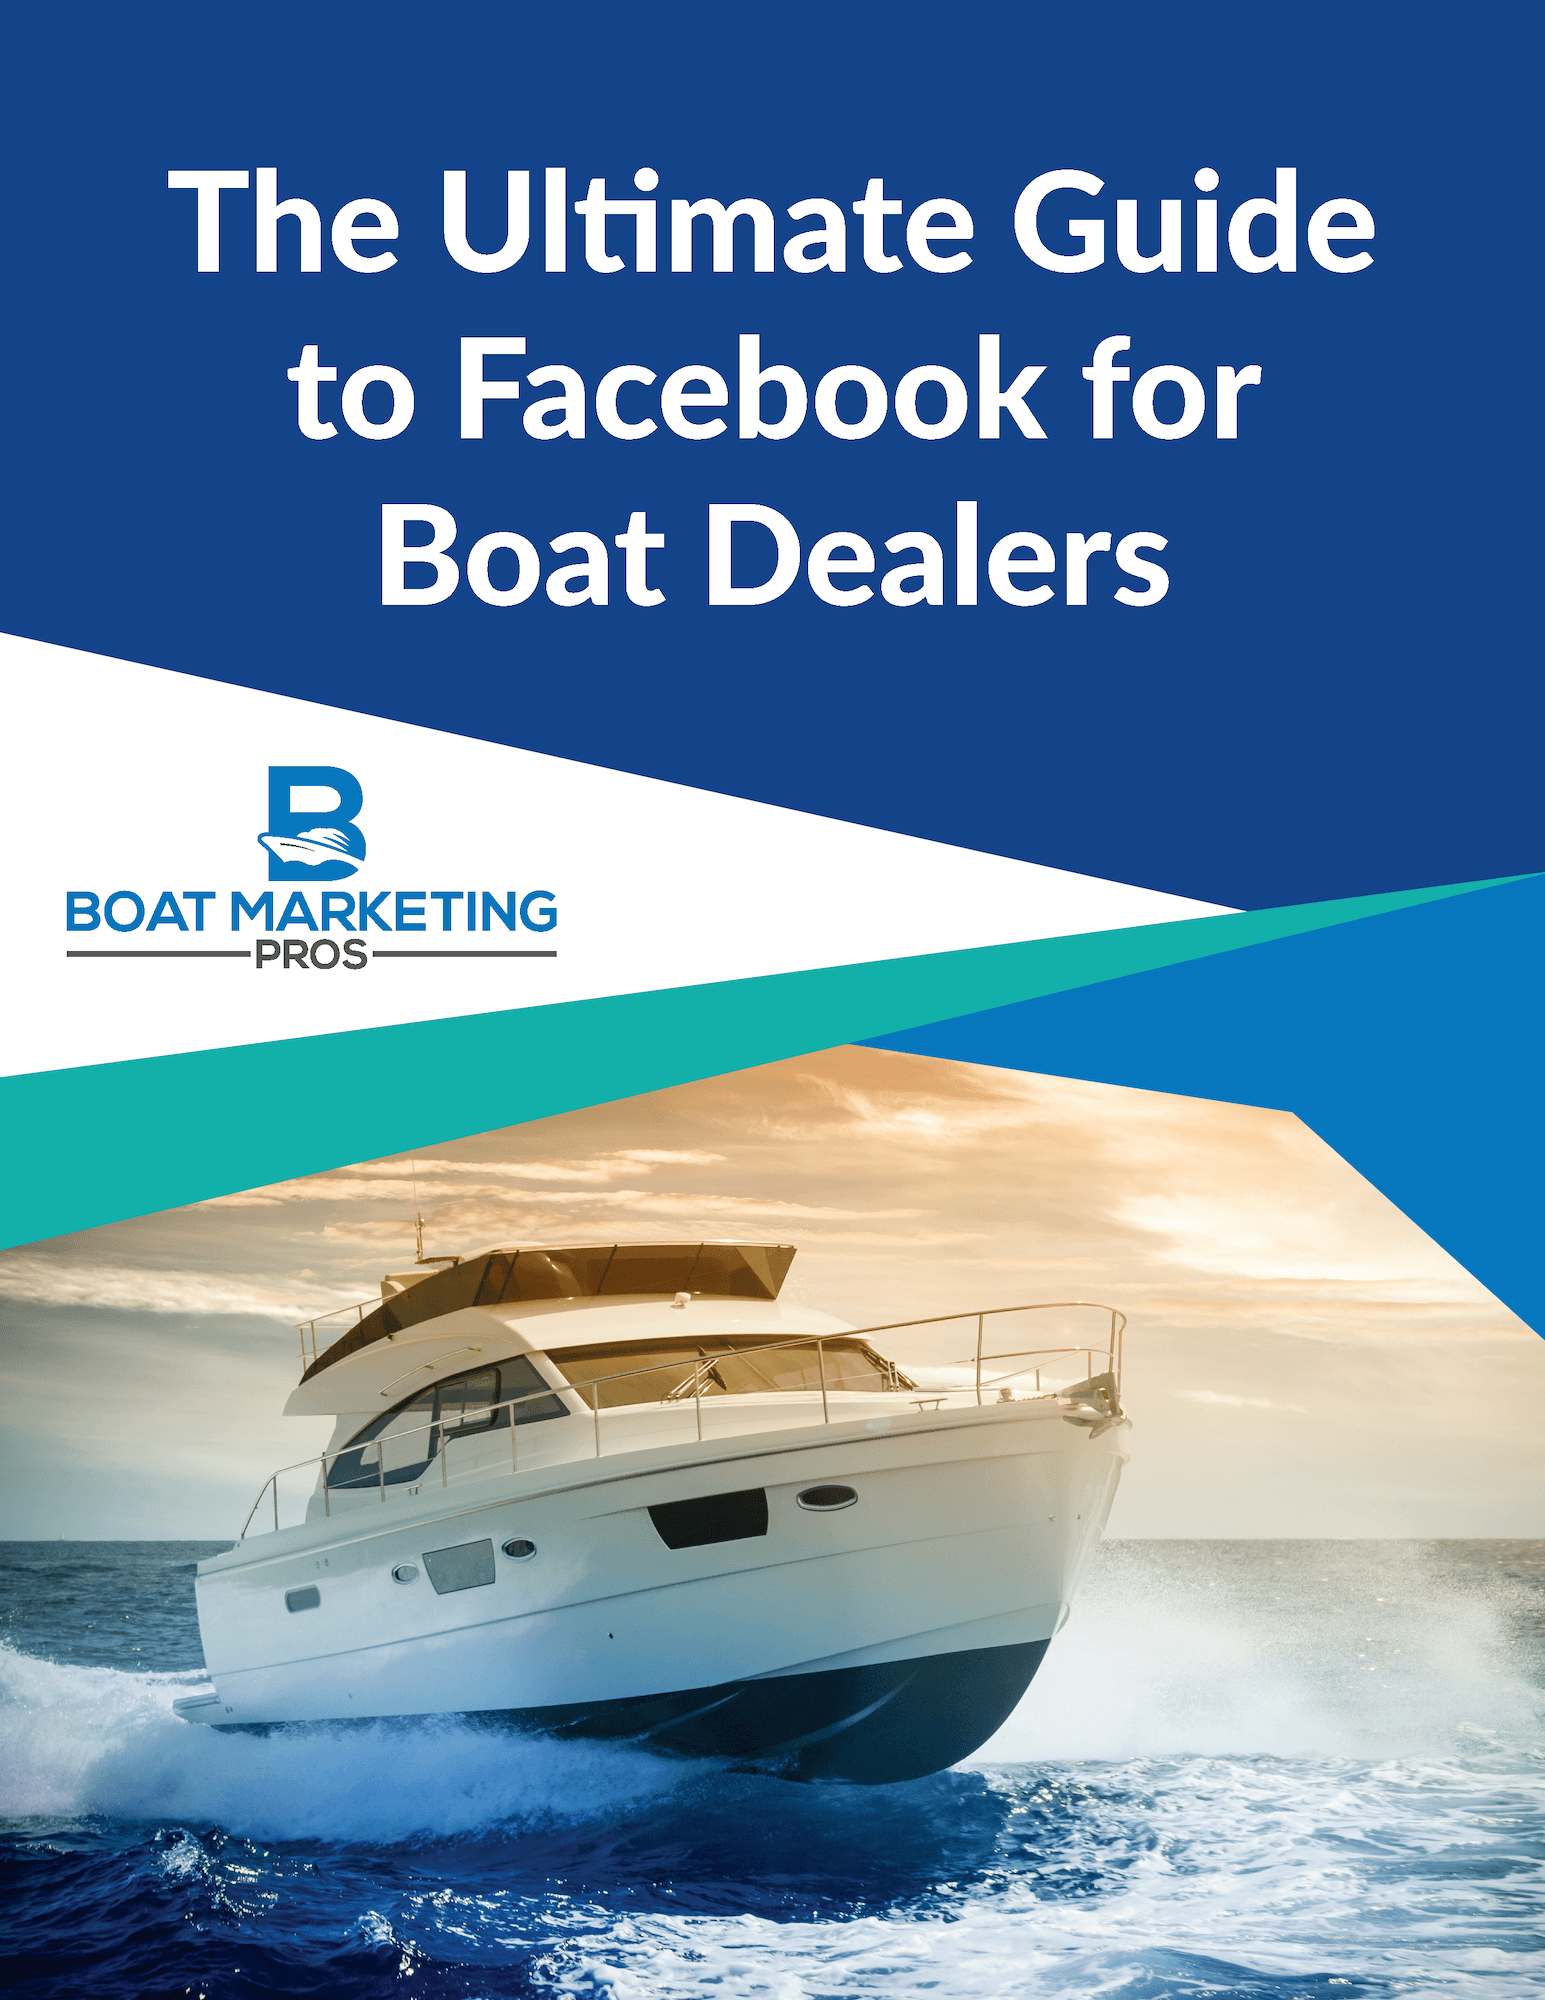 Cover of the Ultimate Guide to Facebook for Boat Dealers